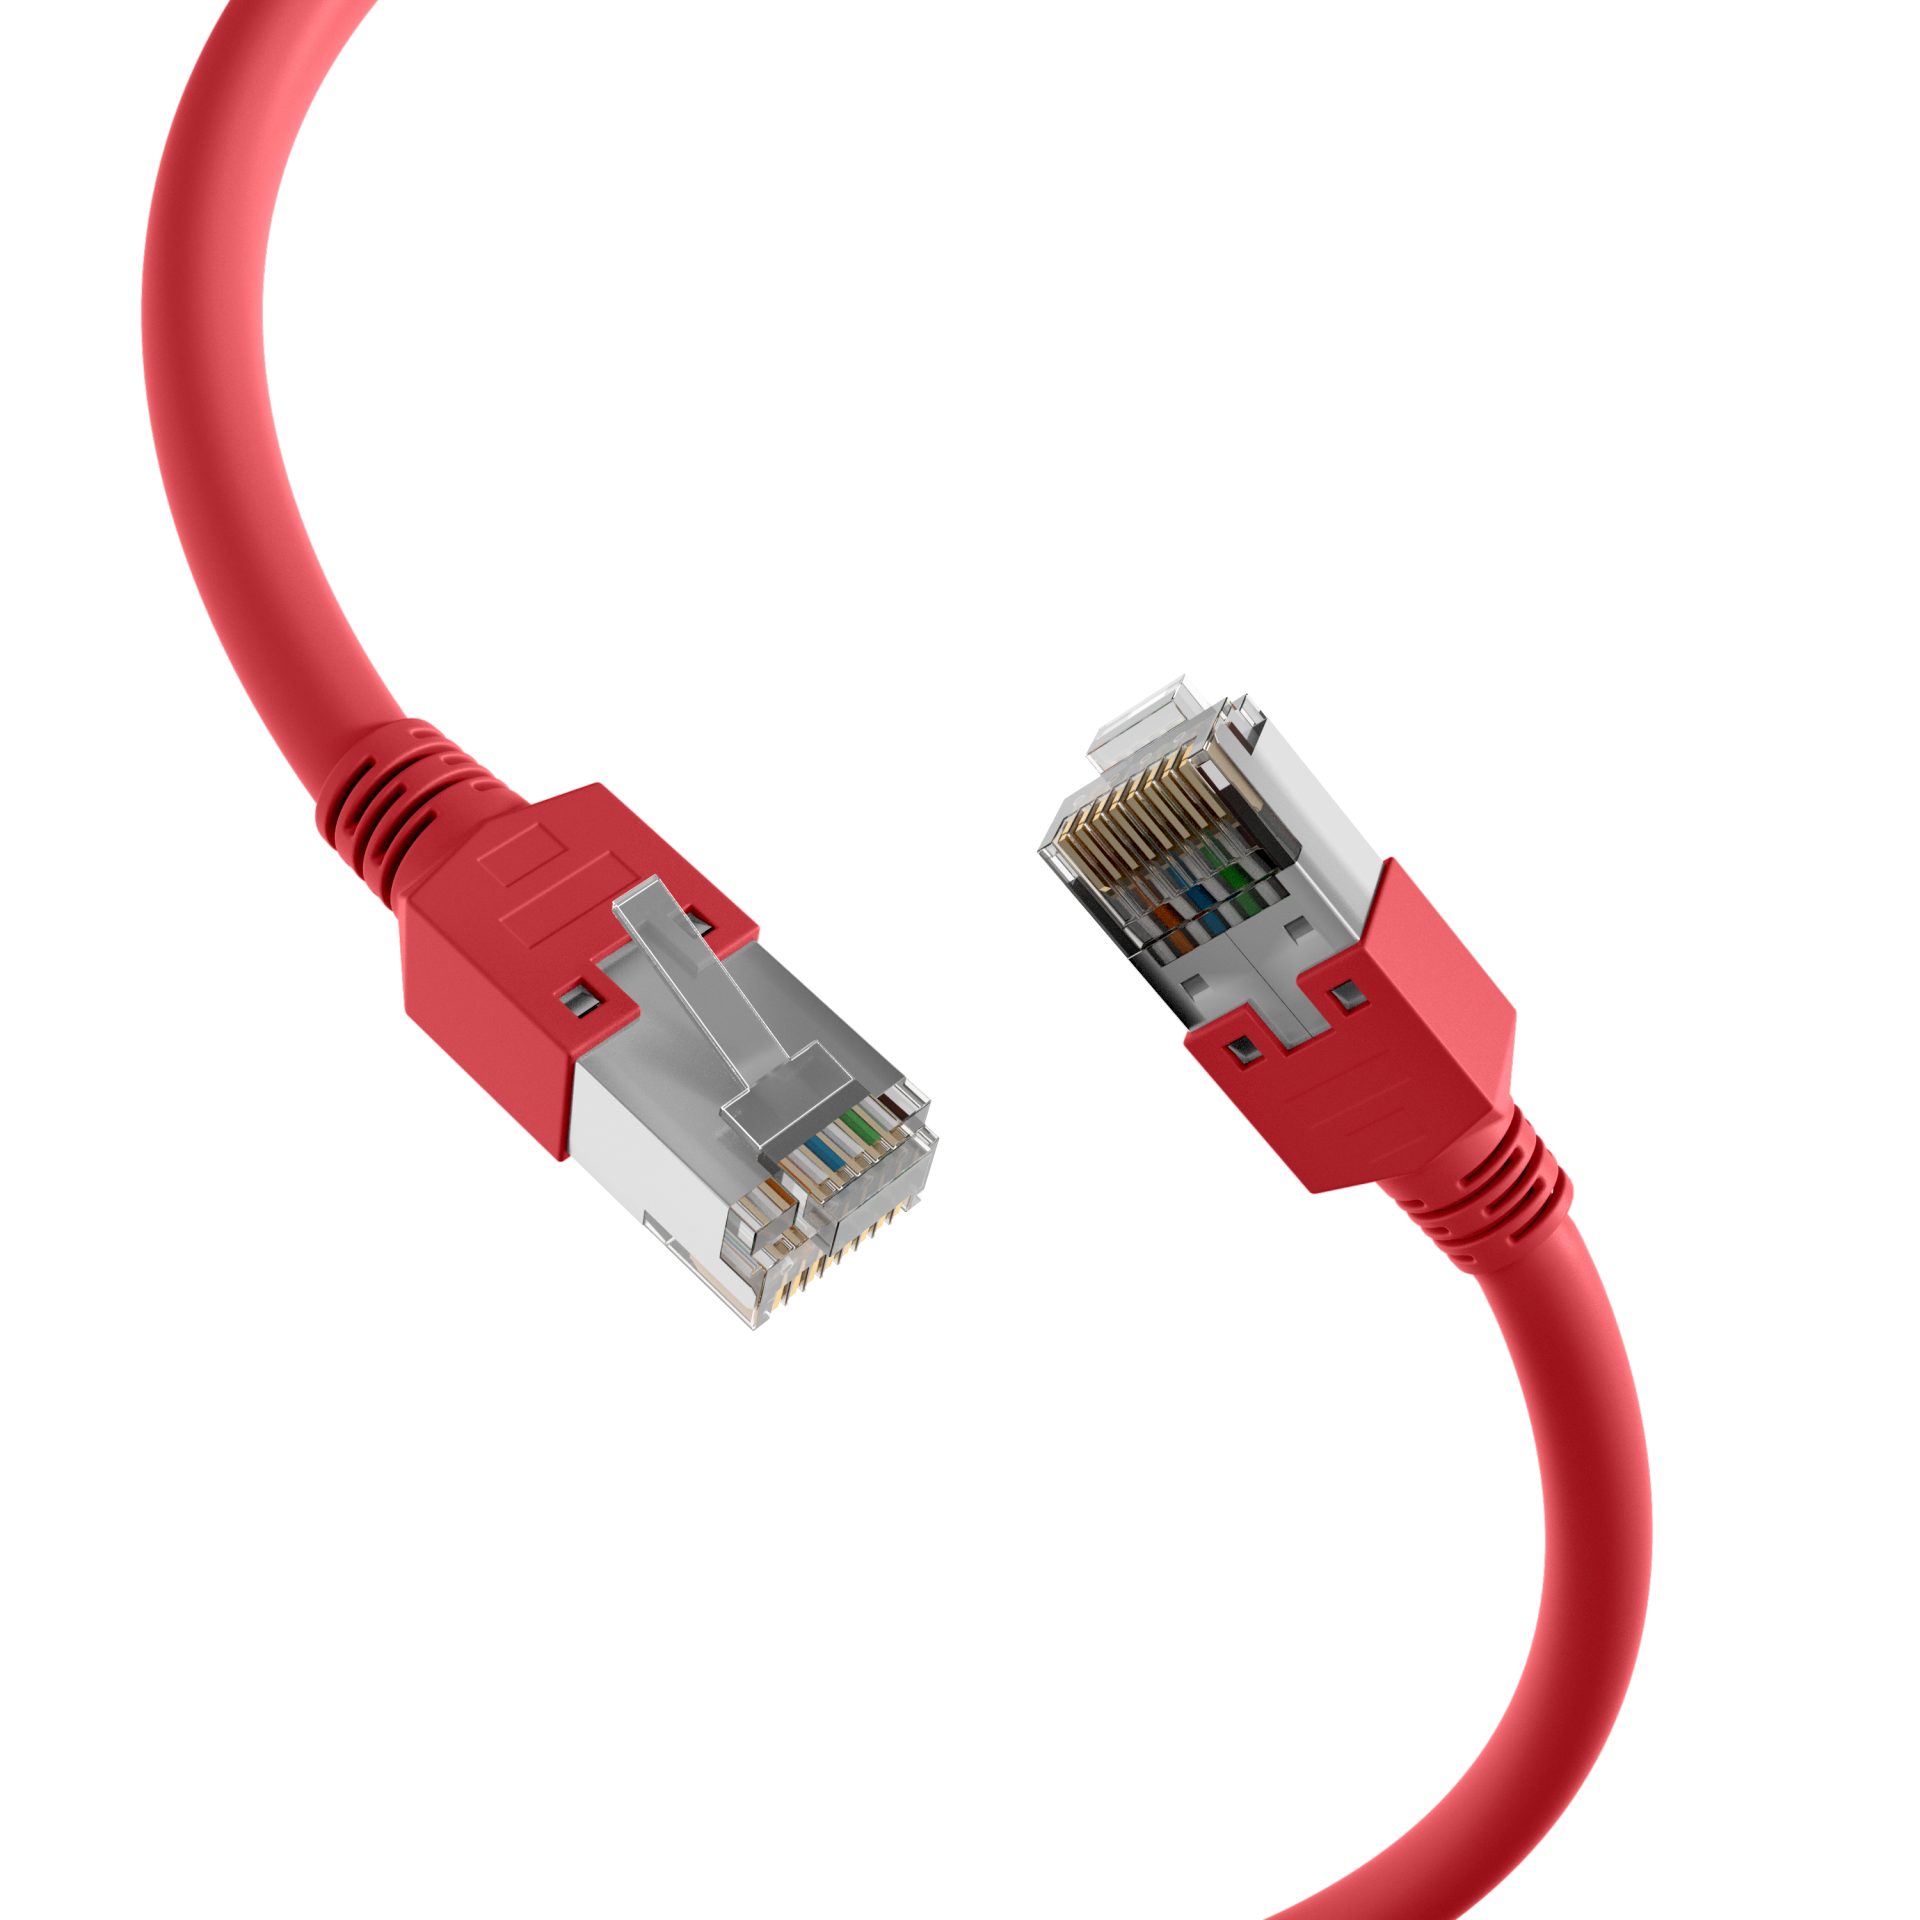 RJ45 Patch Cord Cat.5e S/UTP PVCDätwyler 5502 TM11 red 15m